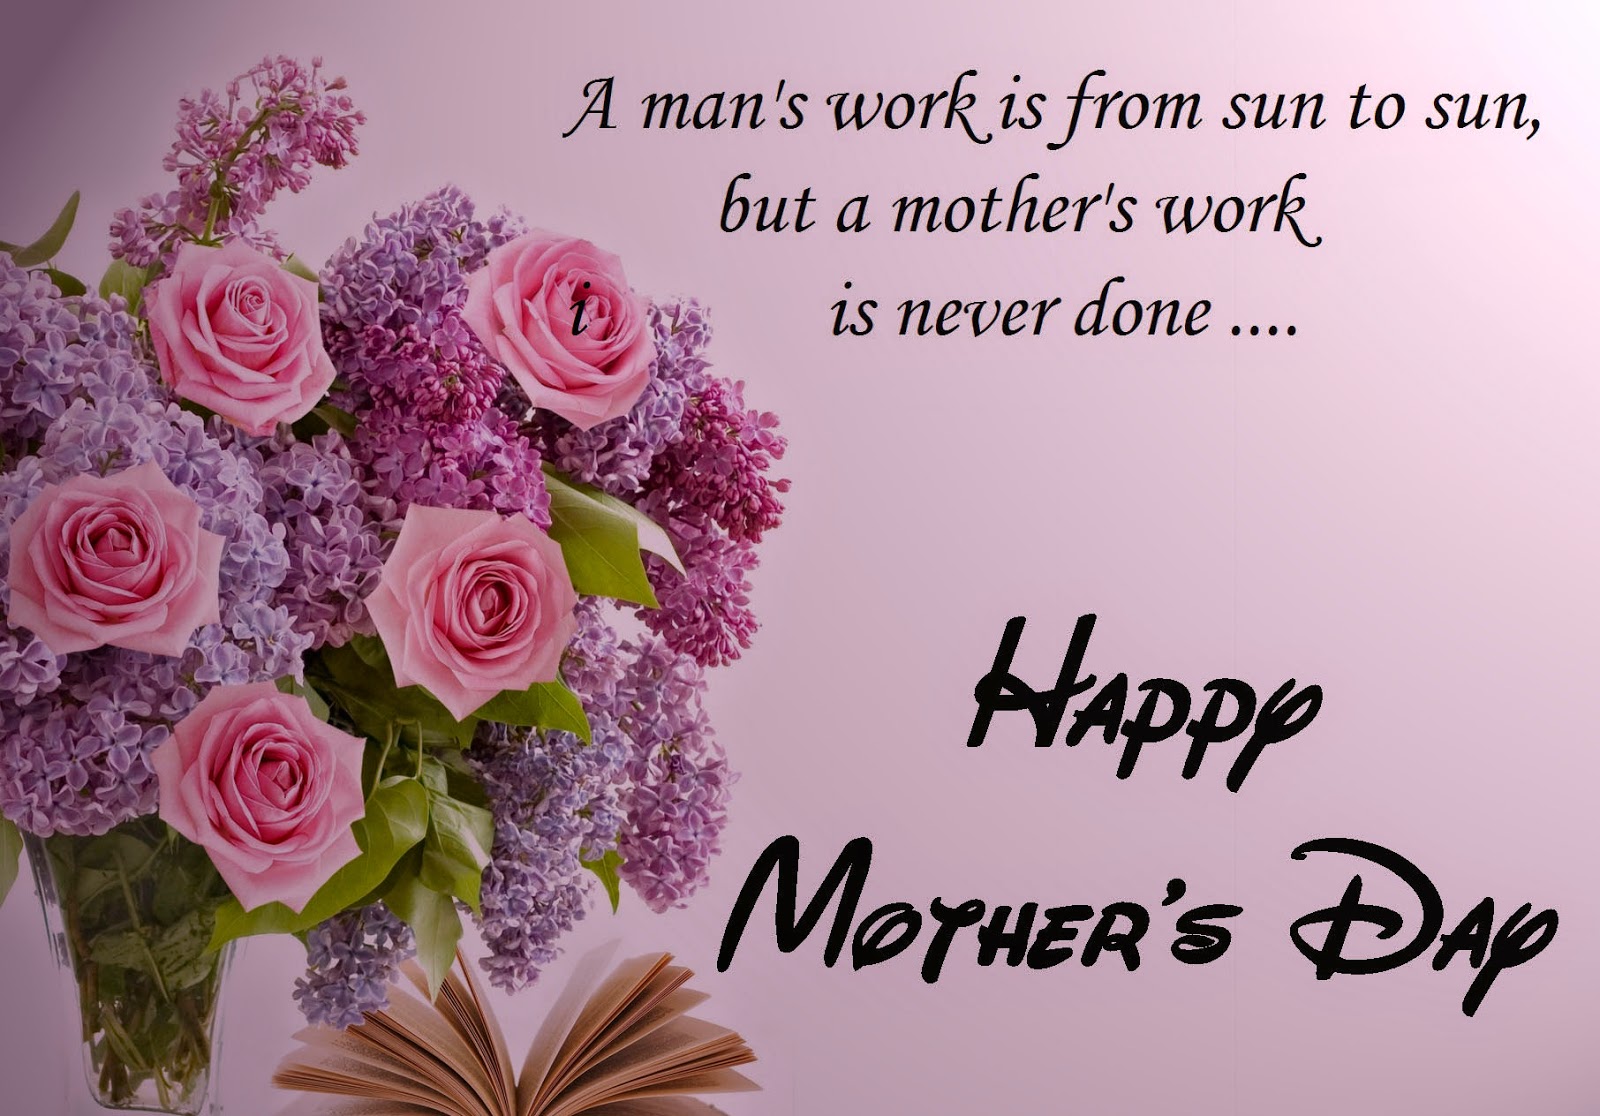 Happy Mothers Day Whatsapp Status and Facebook Messages 